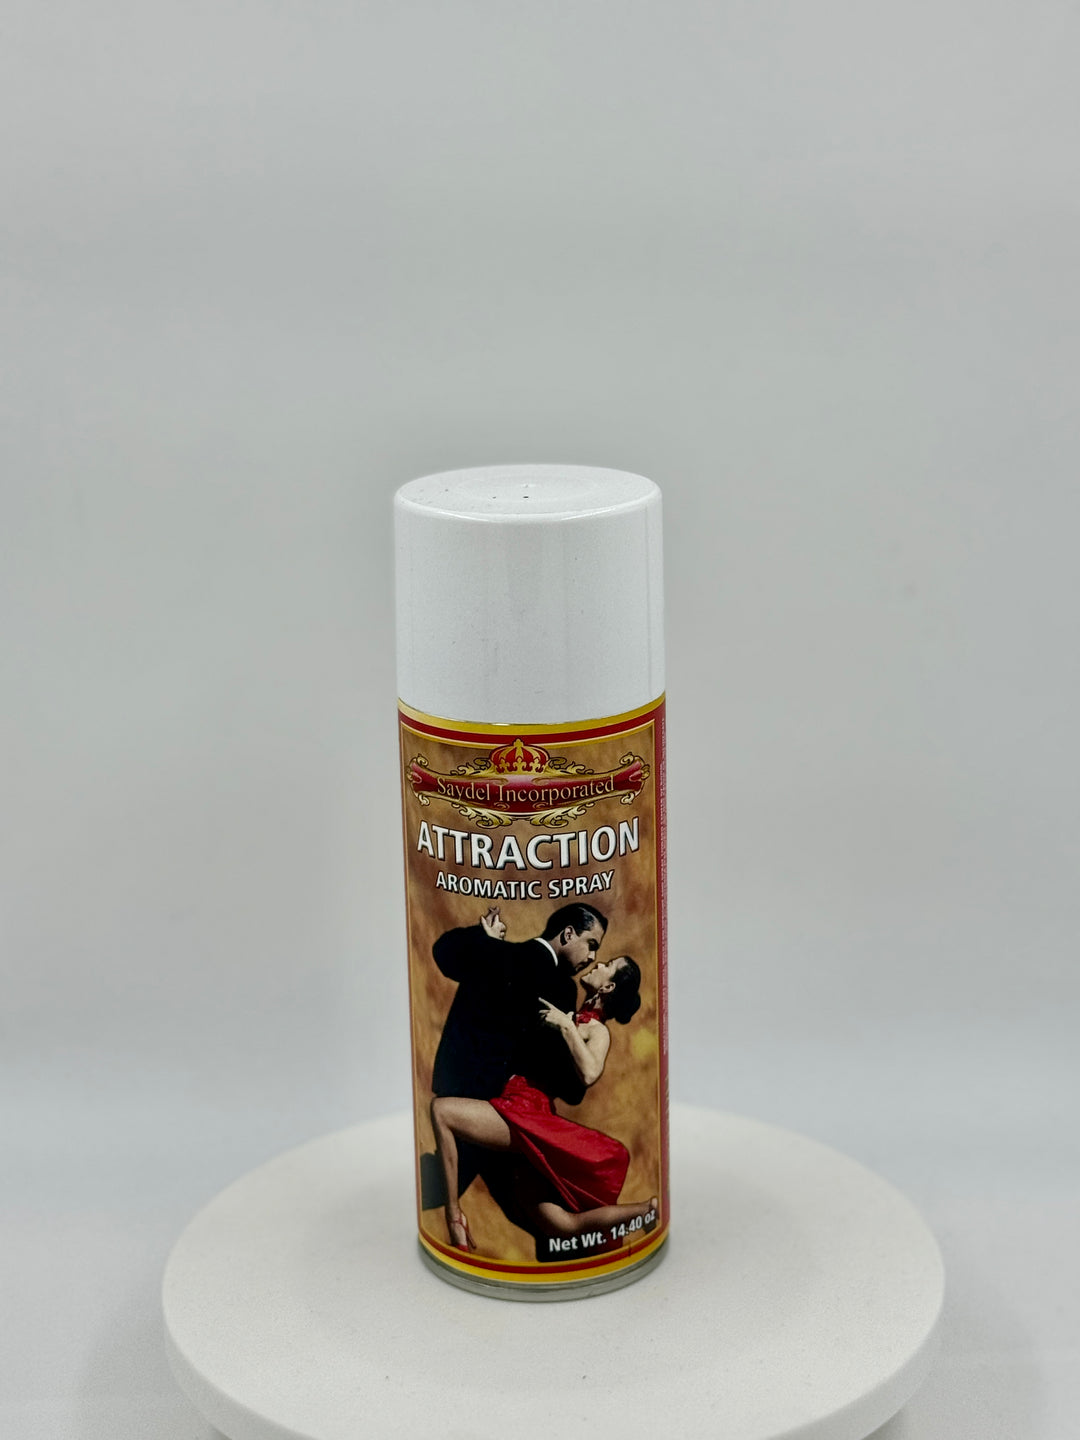 ATTRACTION (ATTRACTION) -Aromatic Spray